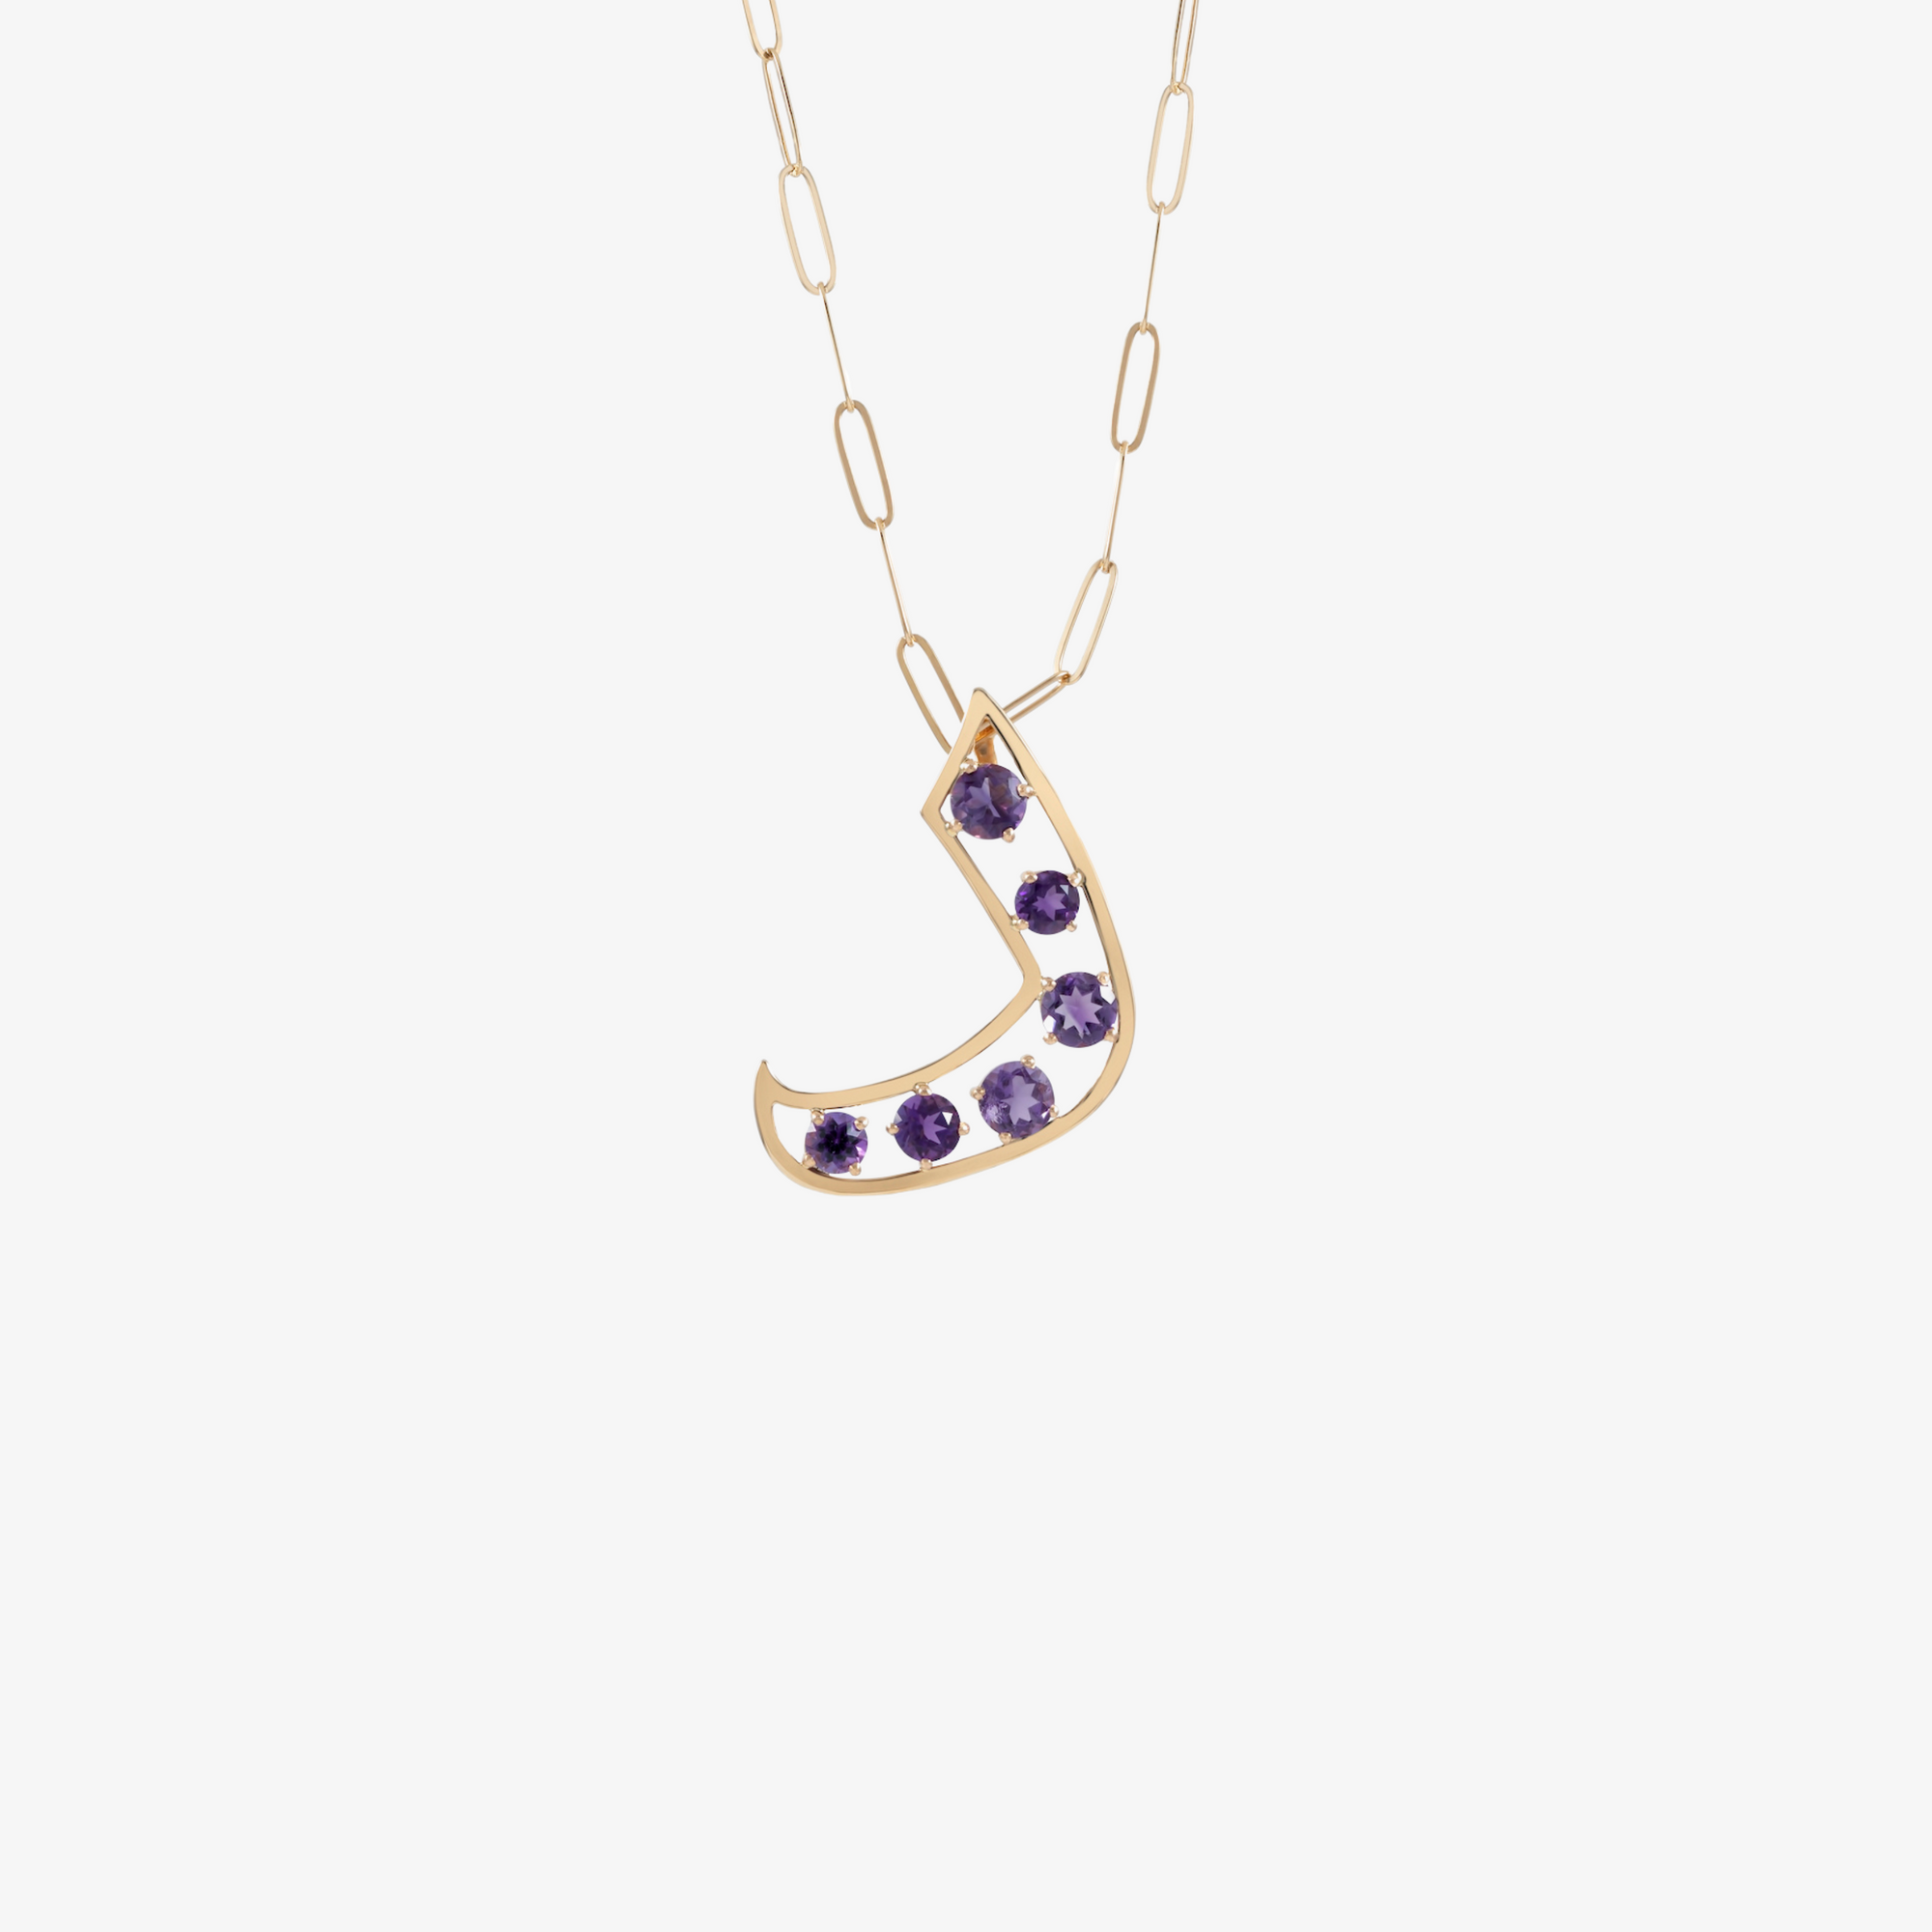 OULA - 18K Gold Frame Necklace with Amethyst Stones